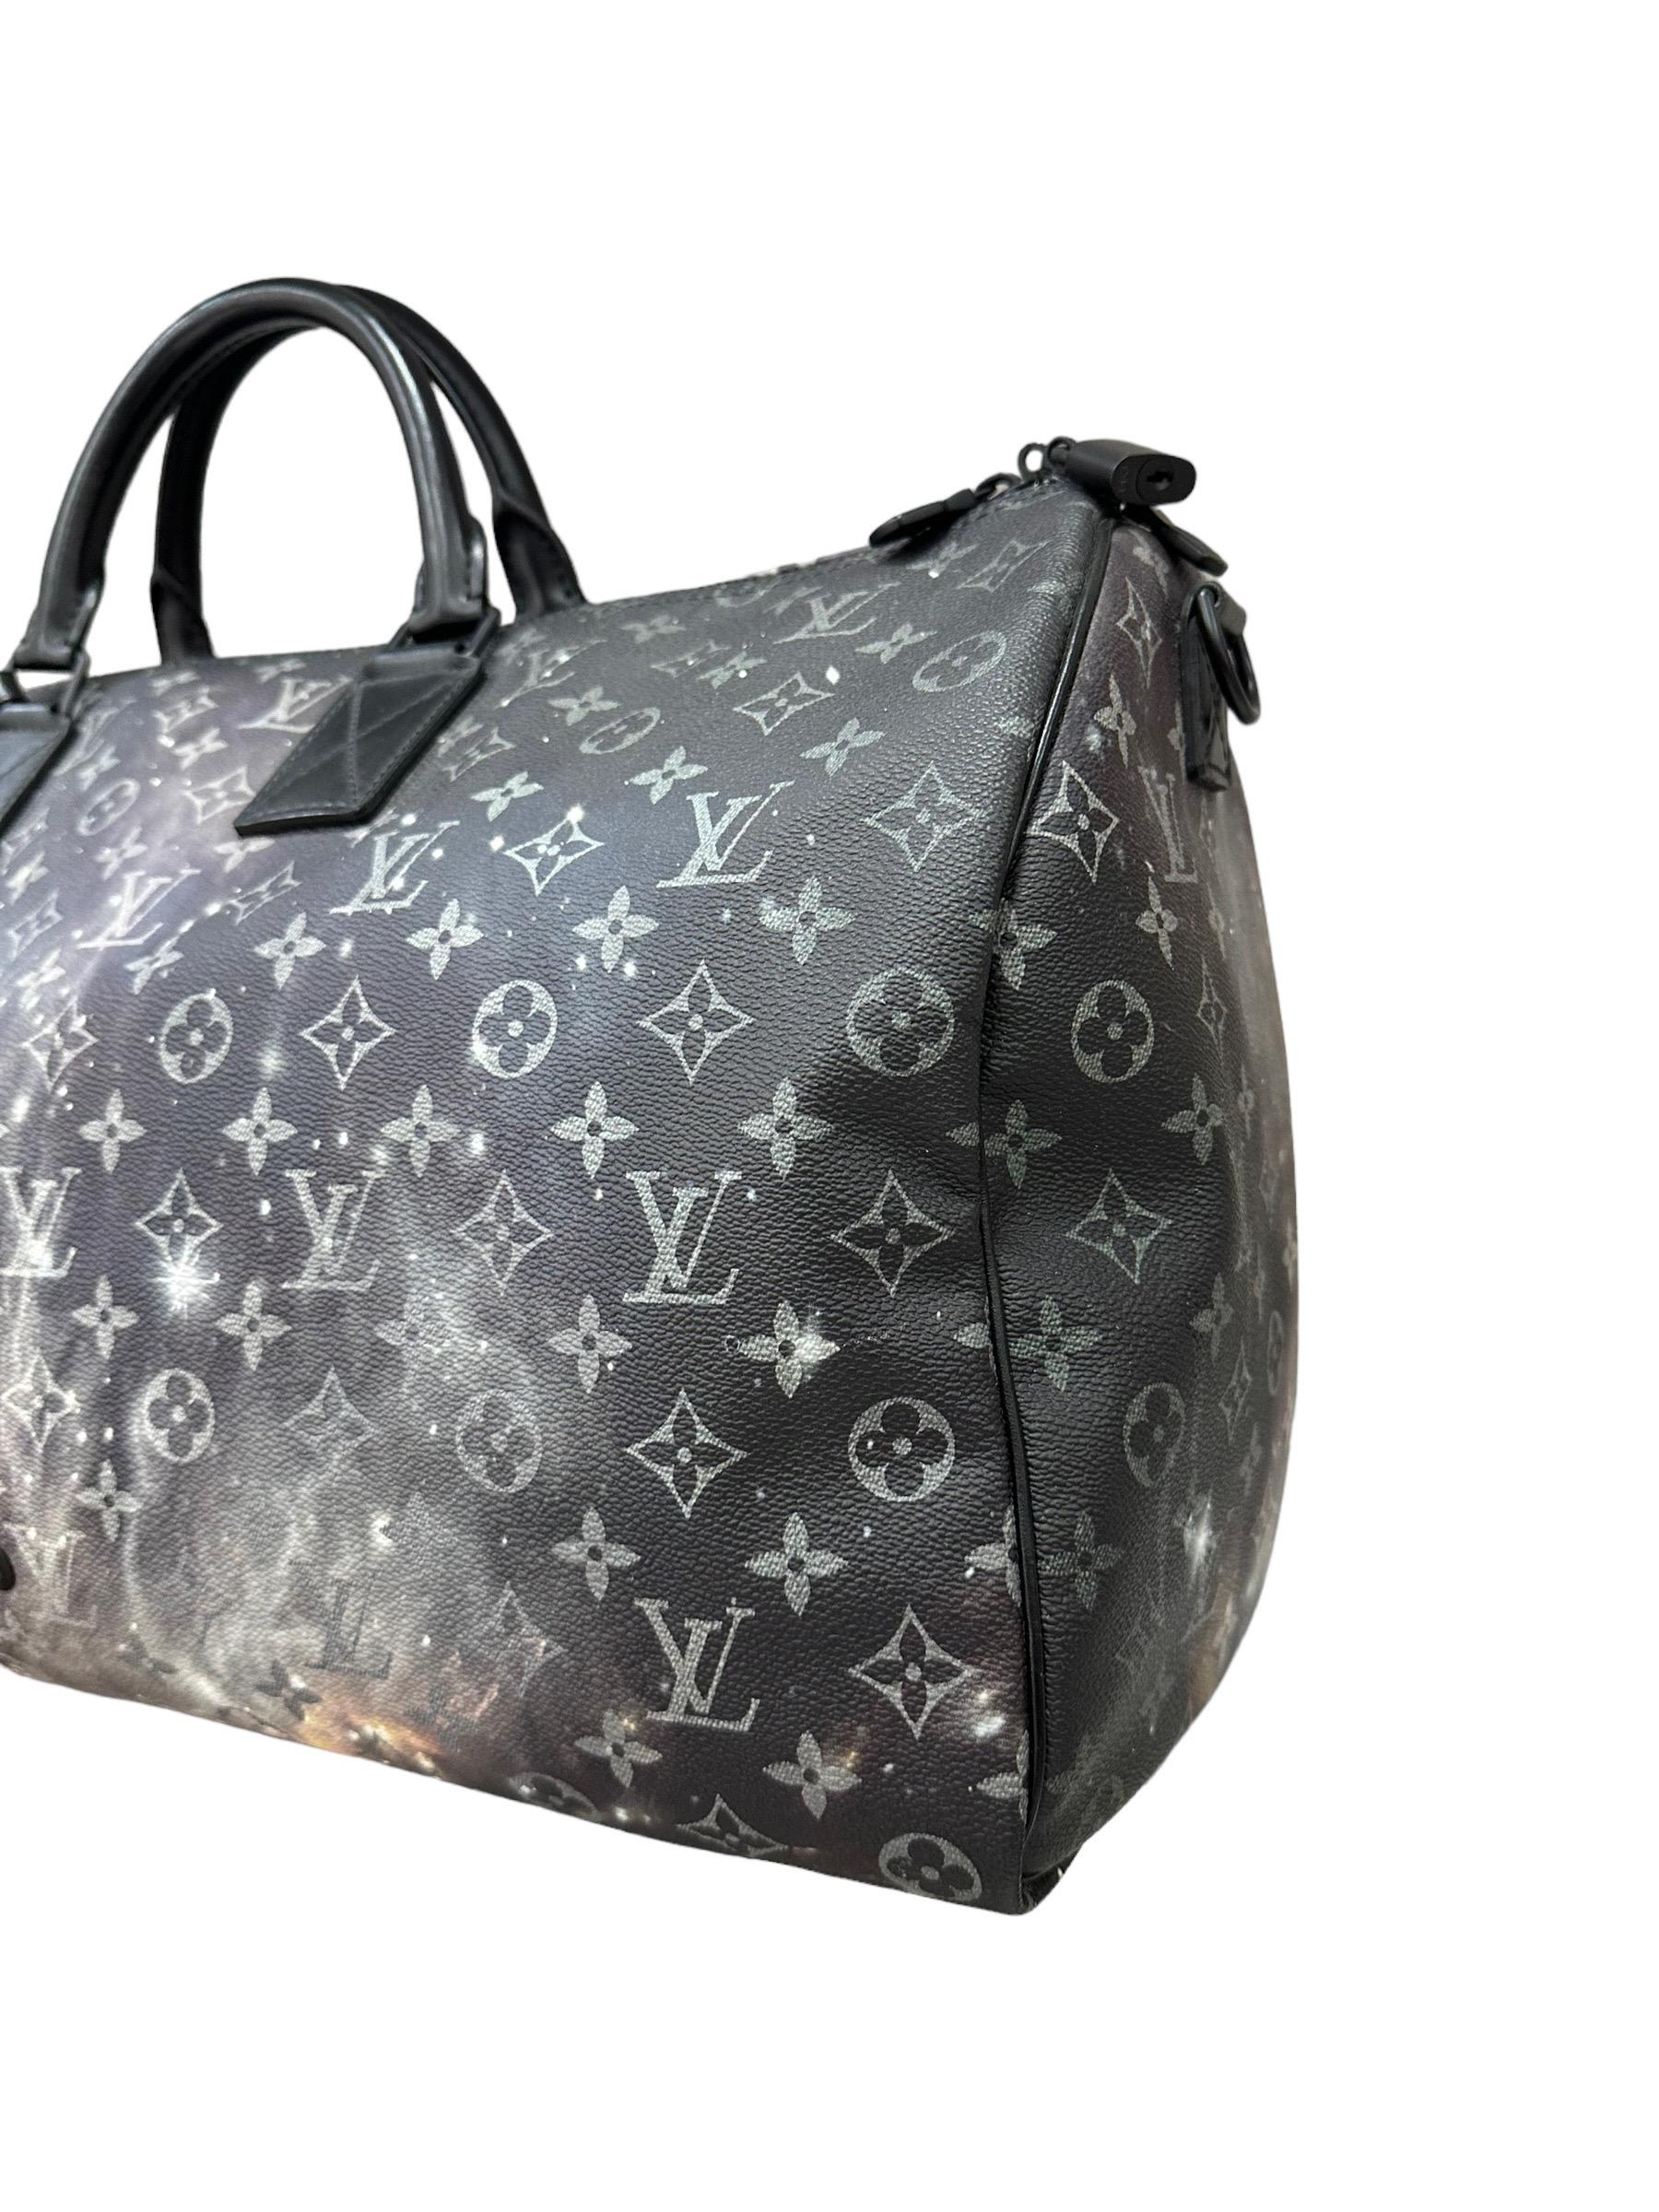 Louis Vuitton Galaxy Keepall Bandouliere 50 Limited Edition Travel Bag For Sale 2